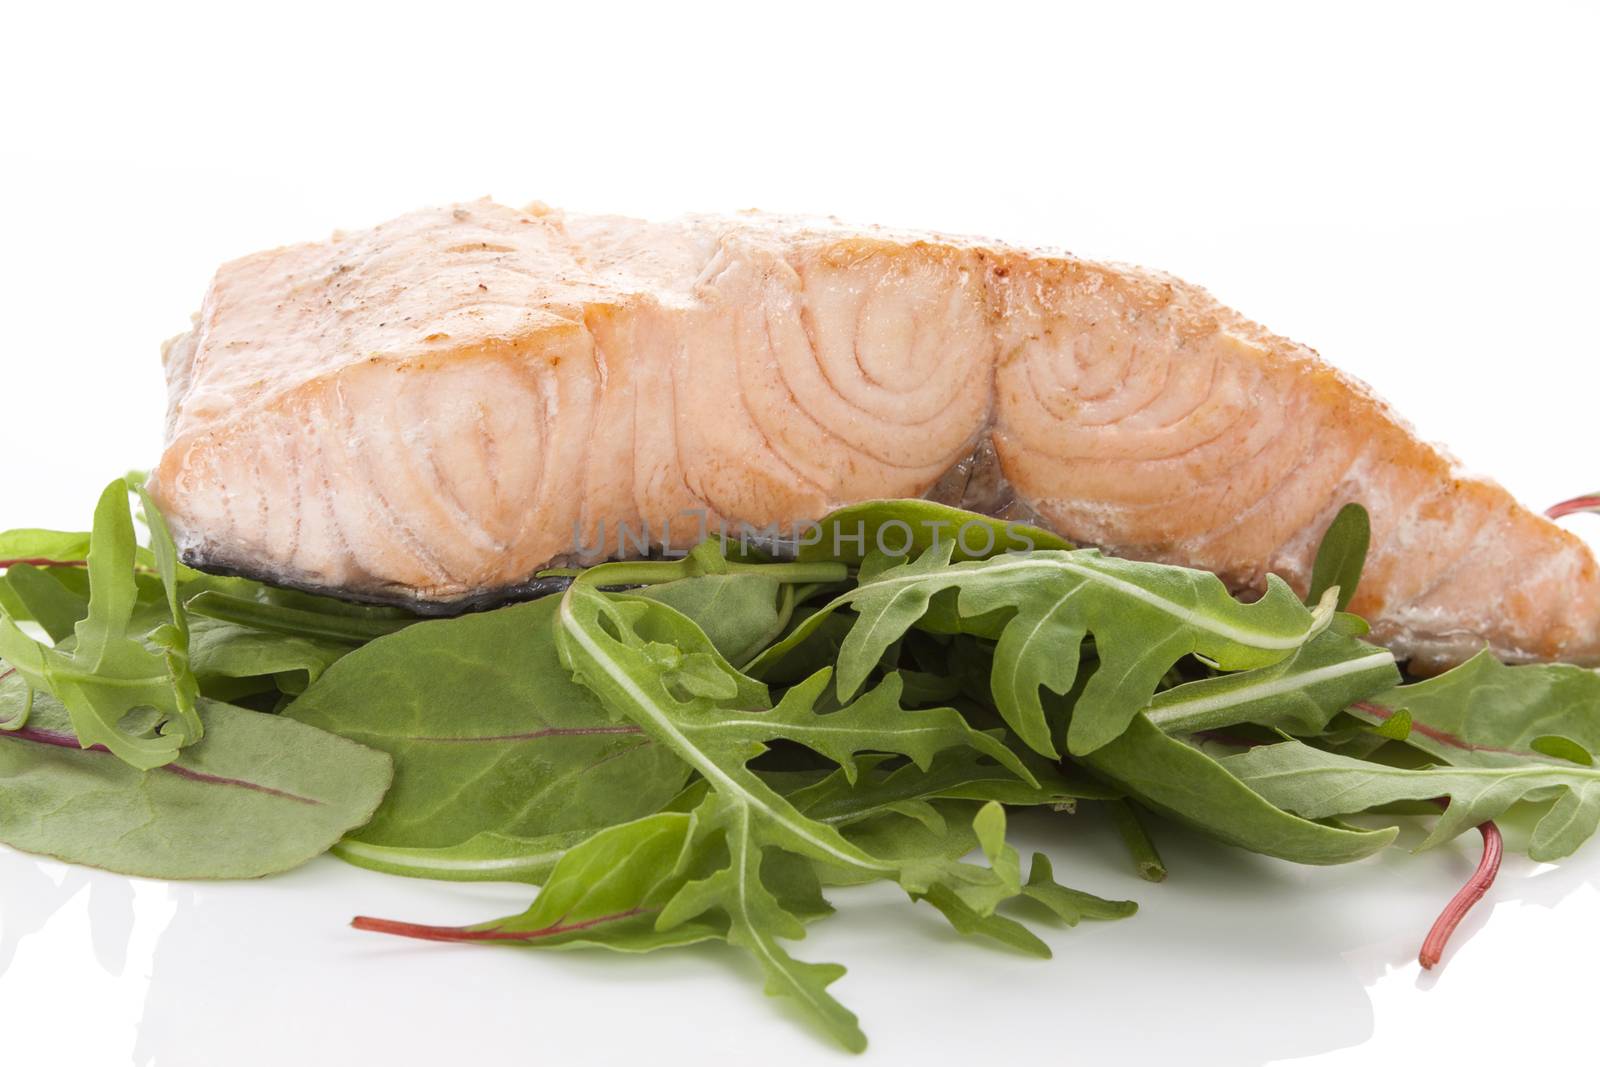 Salmon steak on green salad on white background. Healthy fish eating.